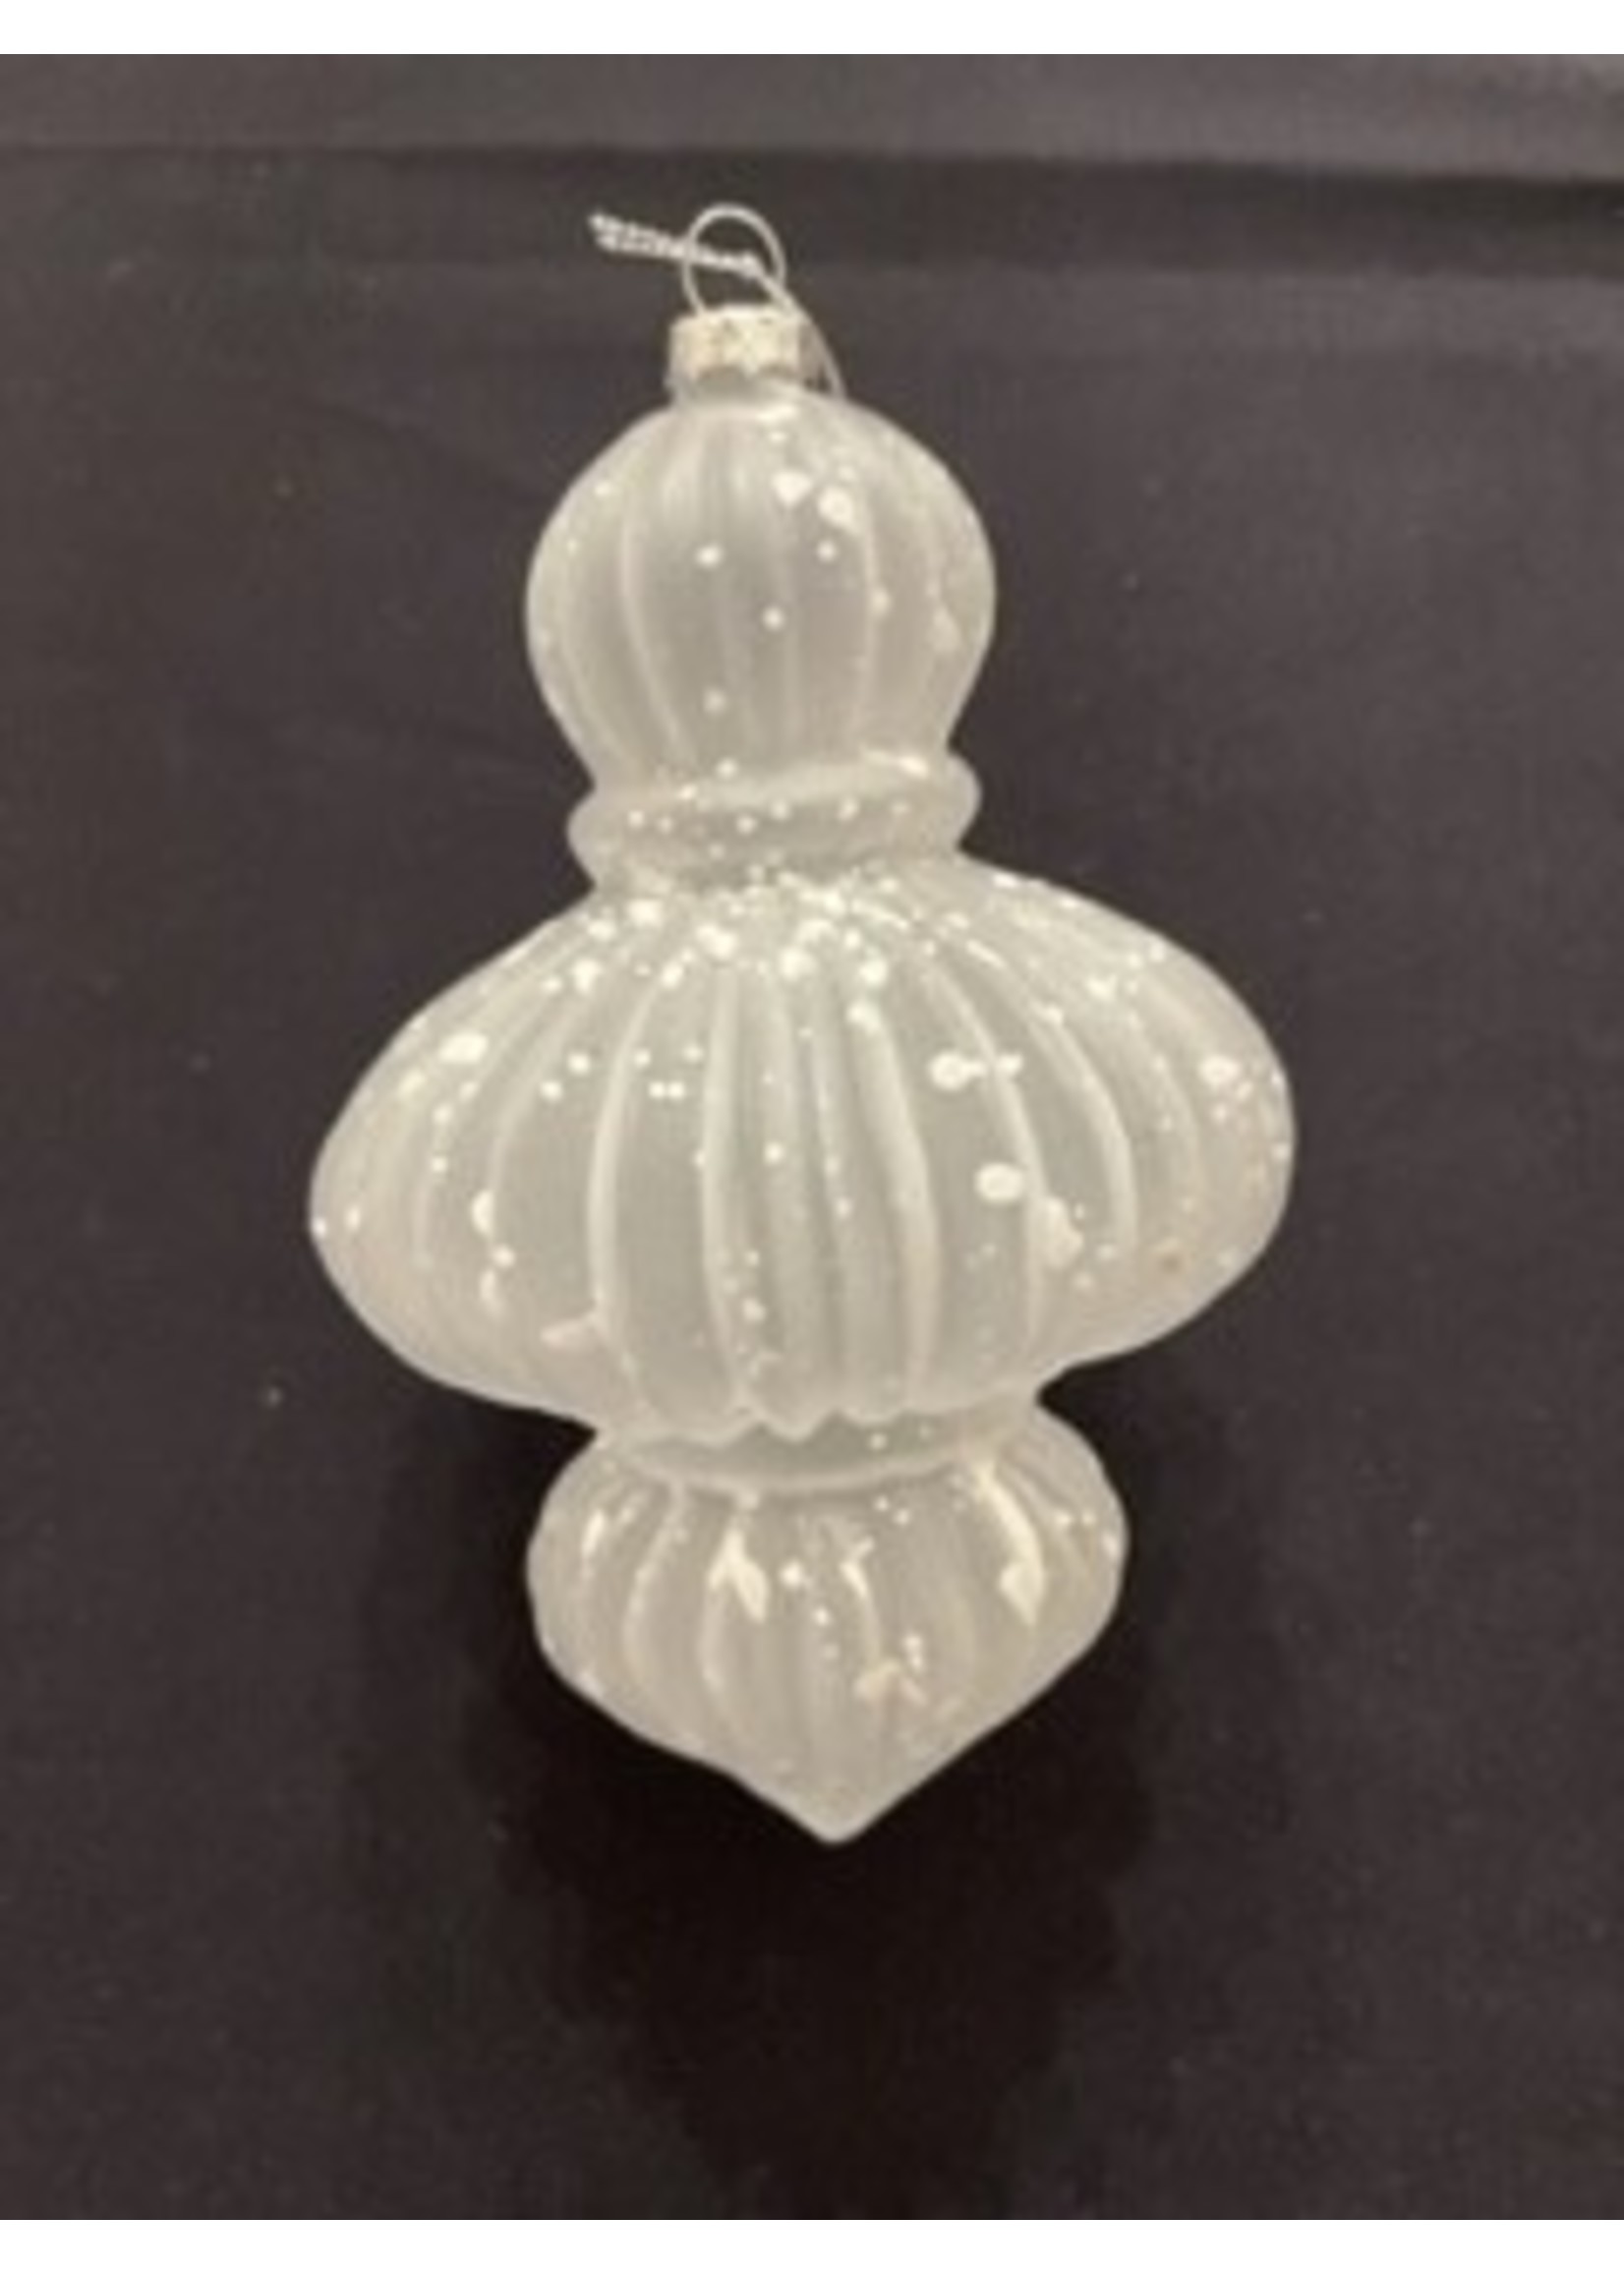 Sullivans Large Finial Frosted or Clear Finial Ornament